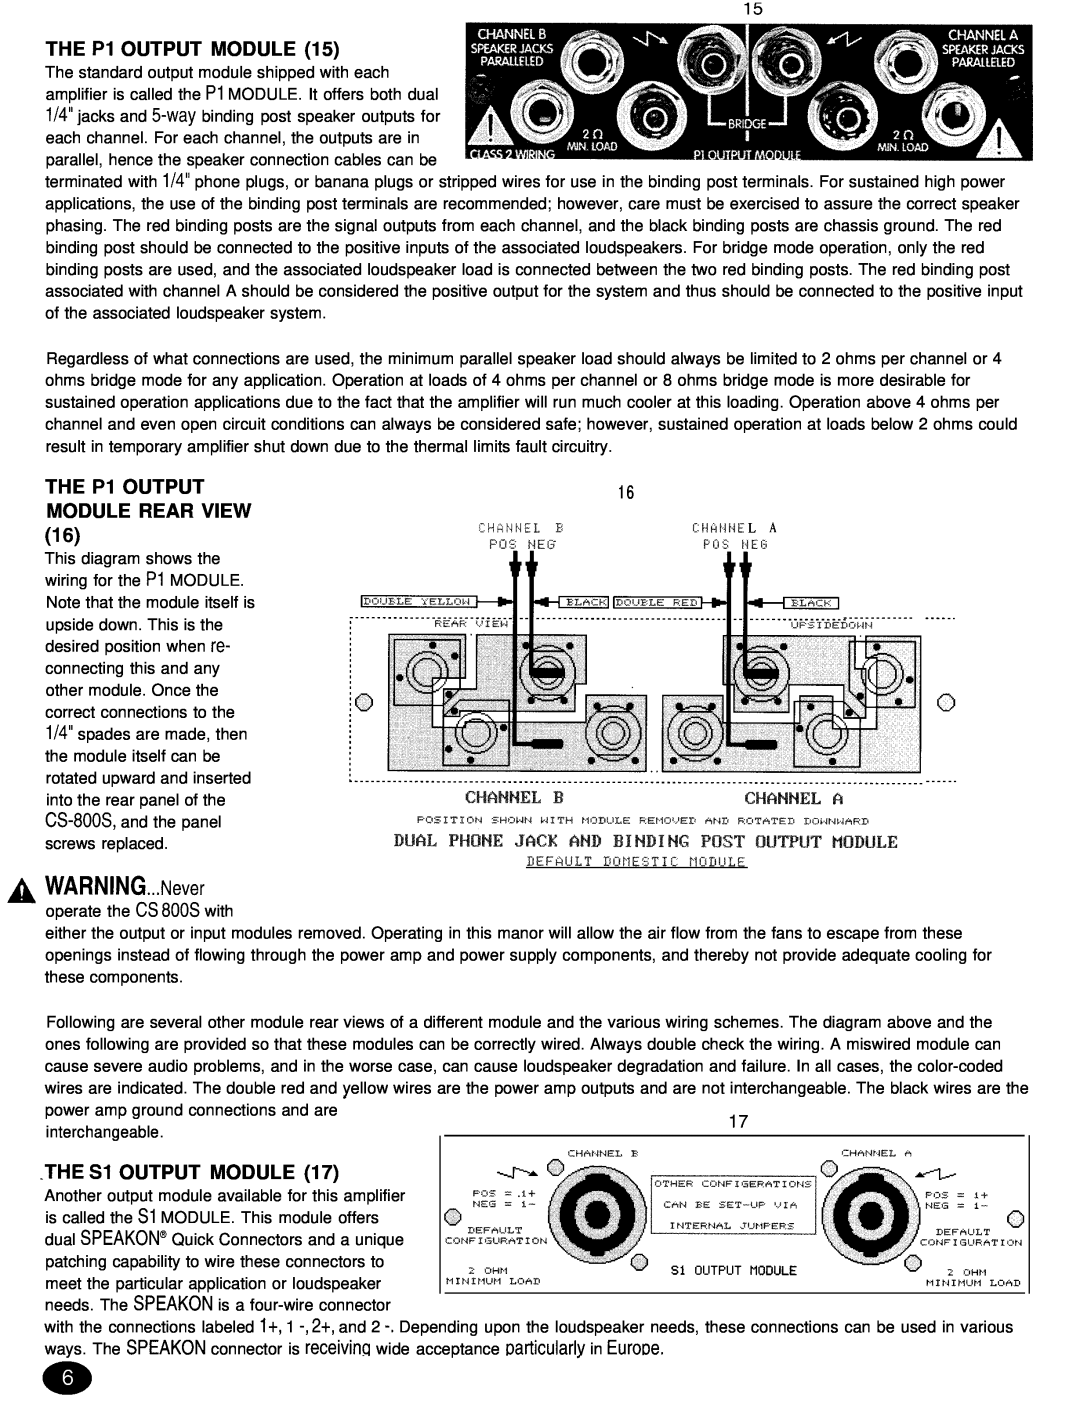 Peavey CS 8OOX manual THE Pl OUTPUT MODULE REAR VIEW, AWARNING...Never operate the CS 800s with, THE Sl OUTPUT MODULE 